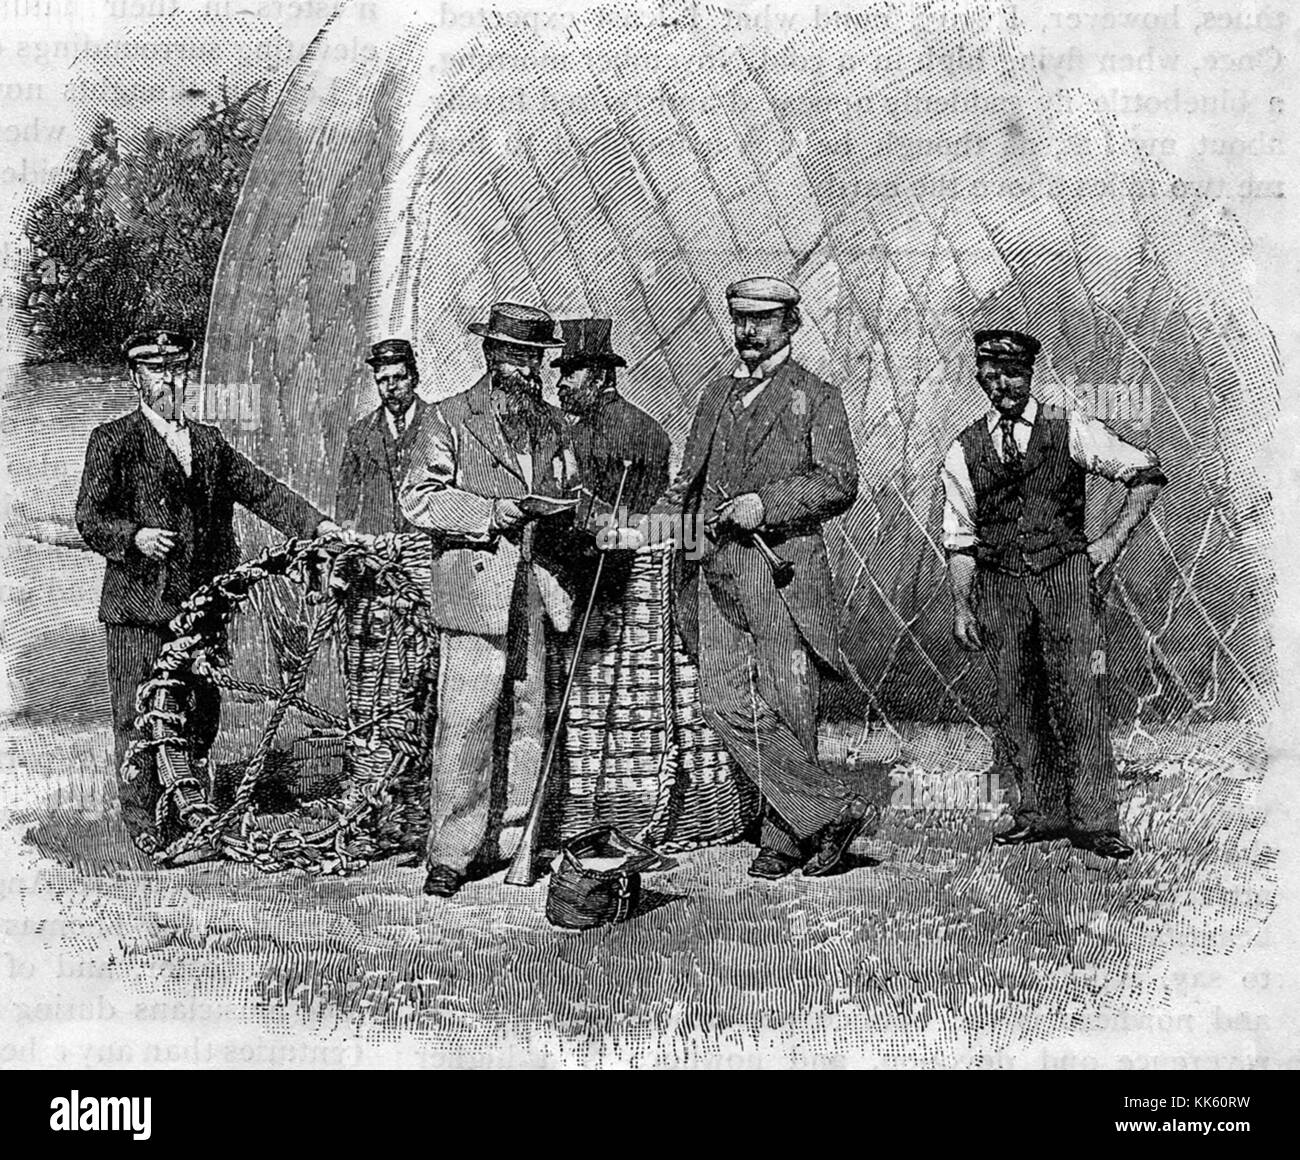 A scientific party of balloon enthusiasts inflating a balloon near Newbury, Berkshire, England  in 1899 Stock Photo